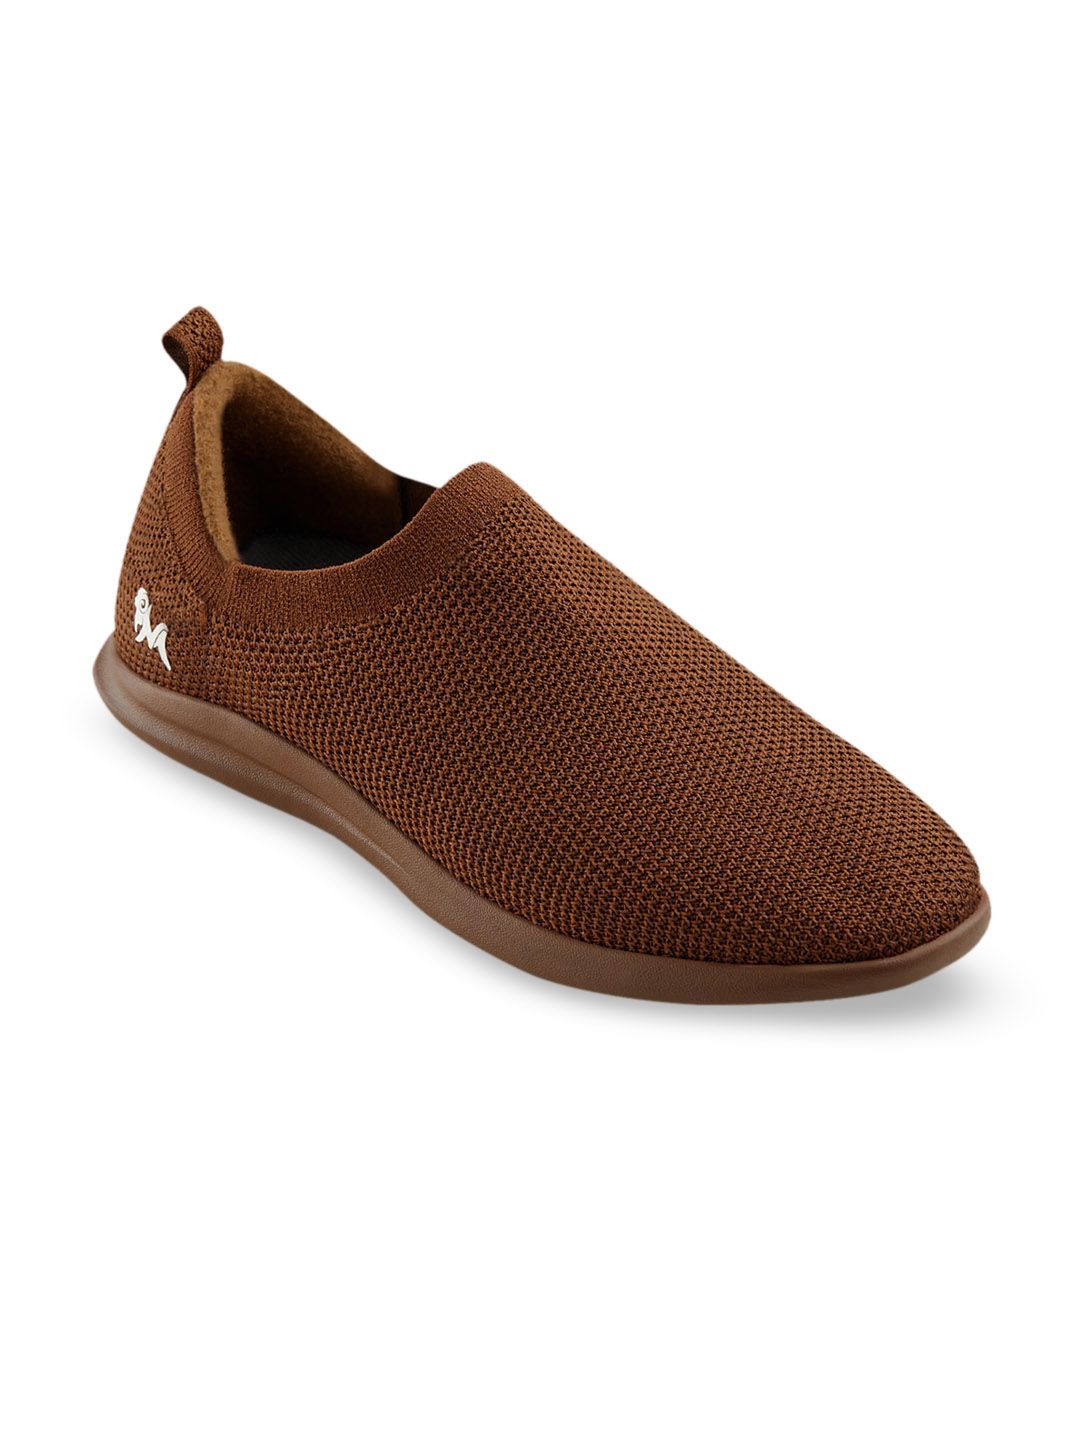 NEEMANS Unisex Brown Re-Live Knit Slip On Sneakers Price in India